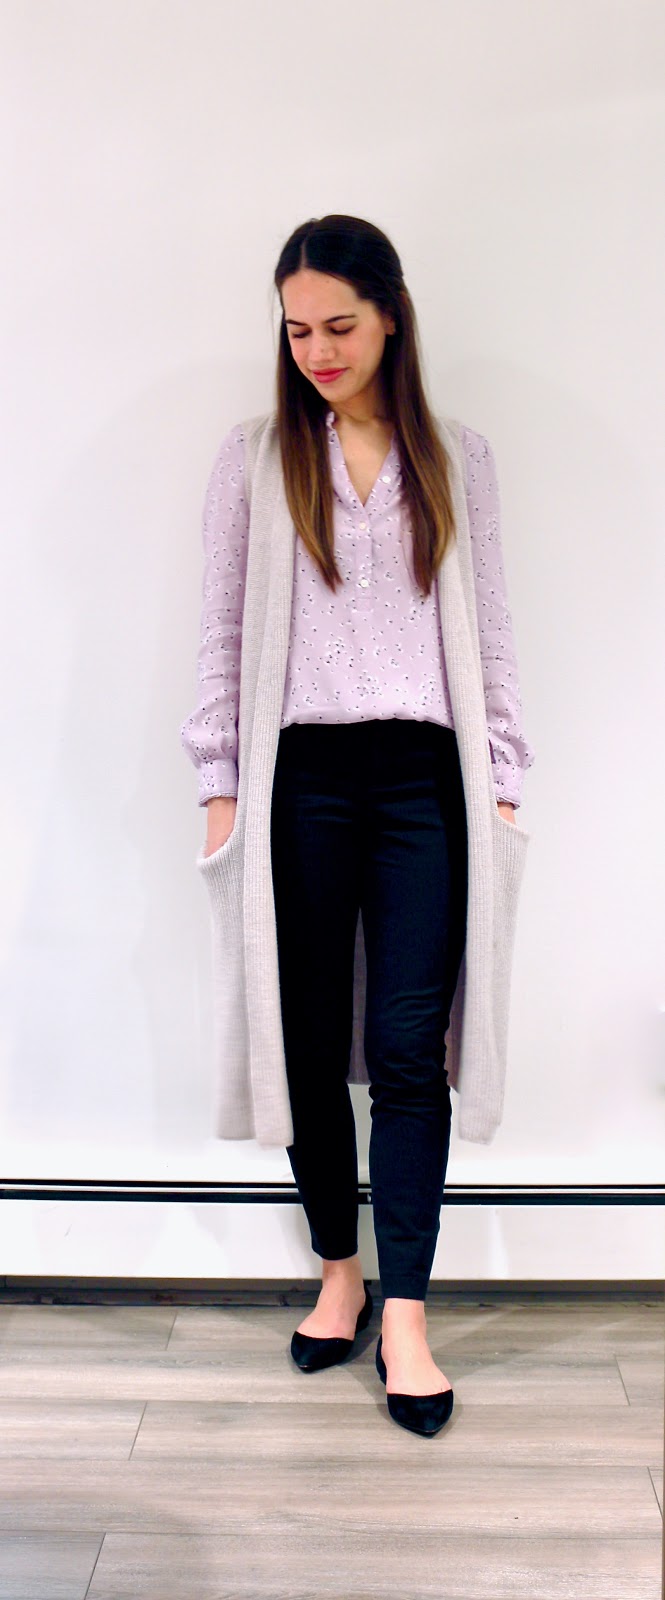 Jules in Flats - Lilac Floral Blouse with Long Knit Vest (Business Casual Winter Workwear on a Budget)